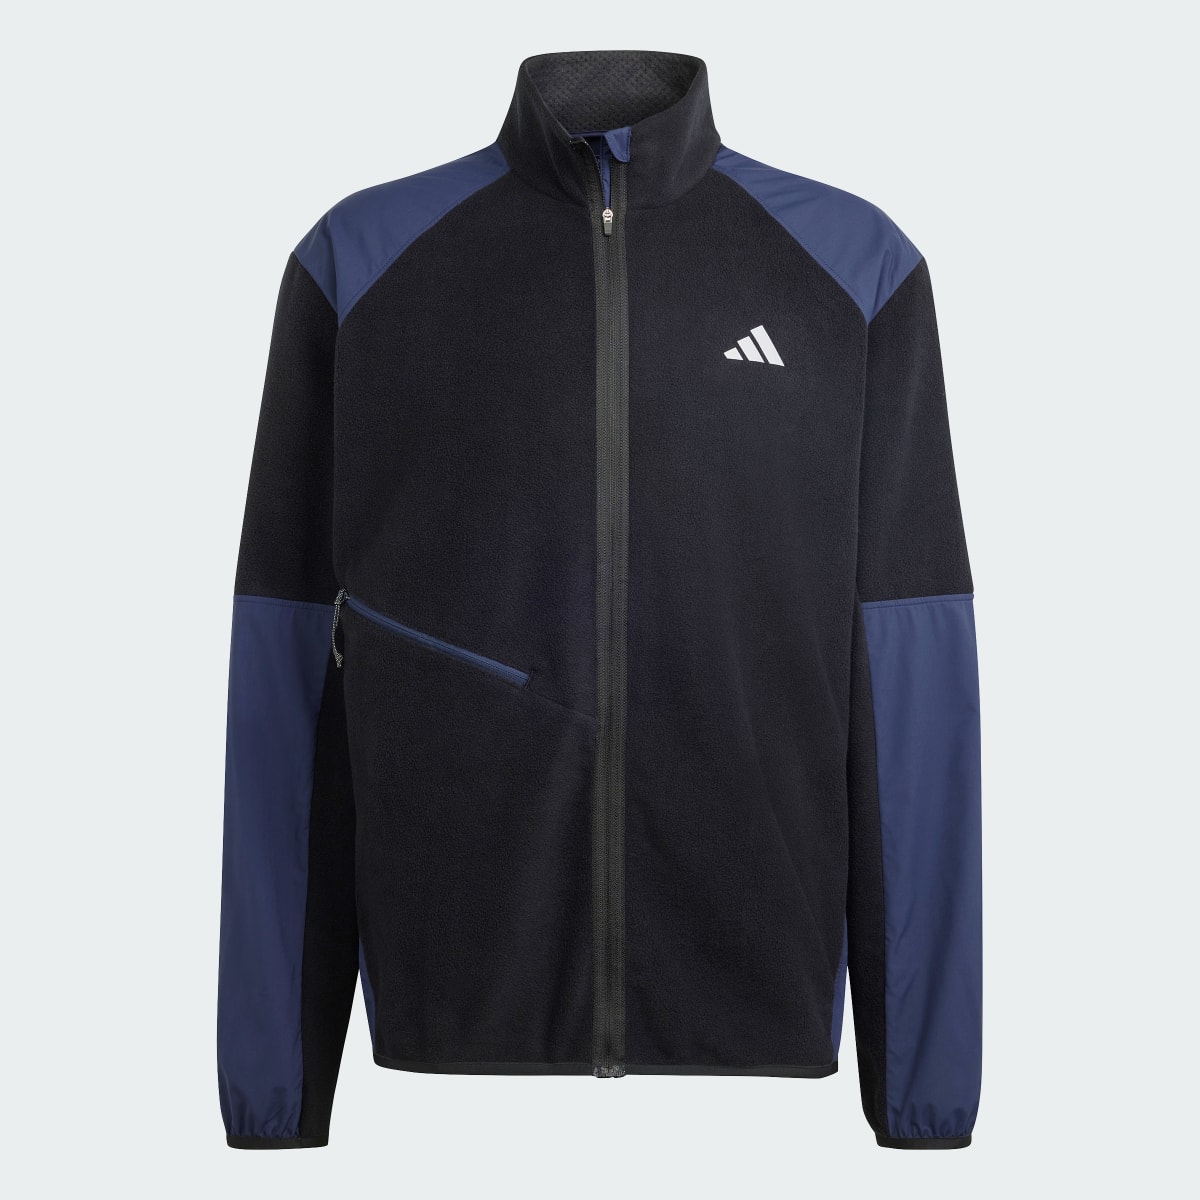 Adidas Ultimate Running Conquer the Elements Jacket. 5